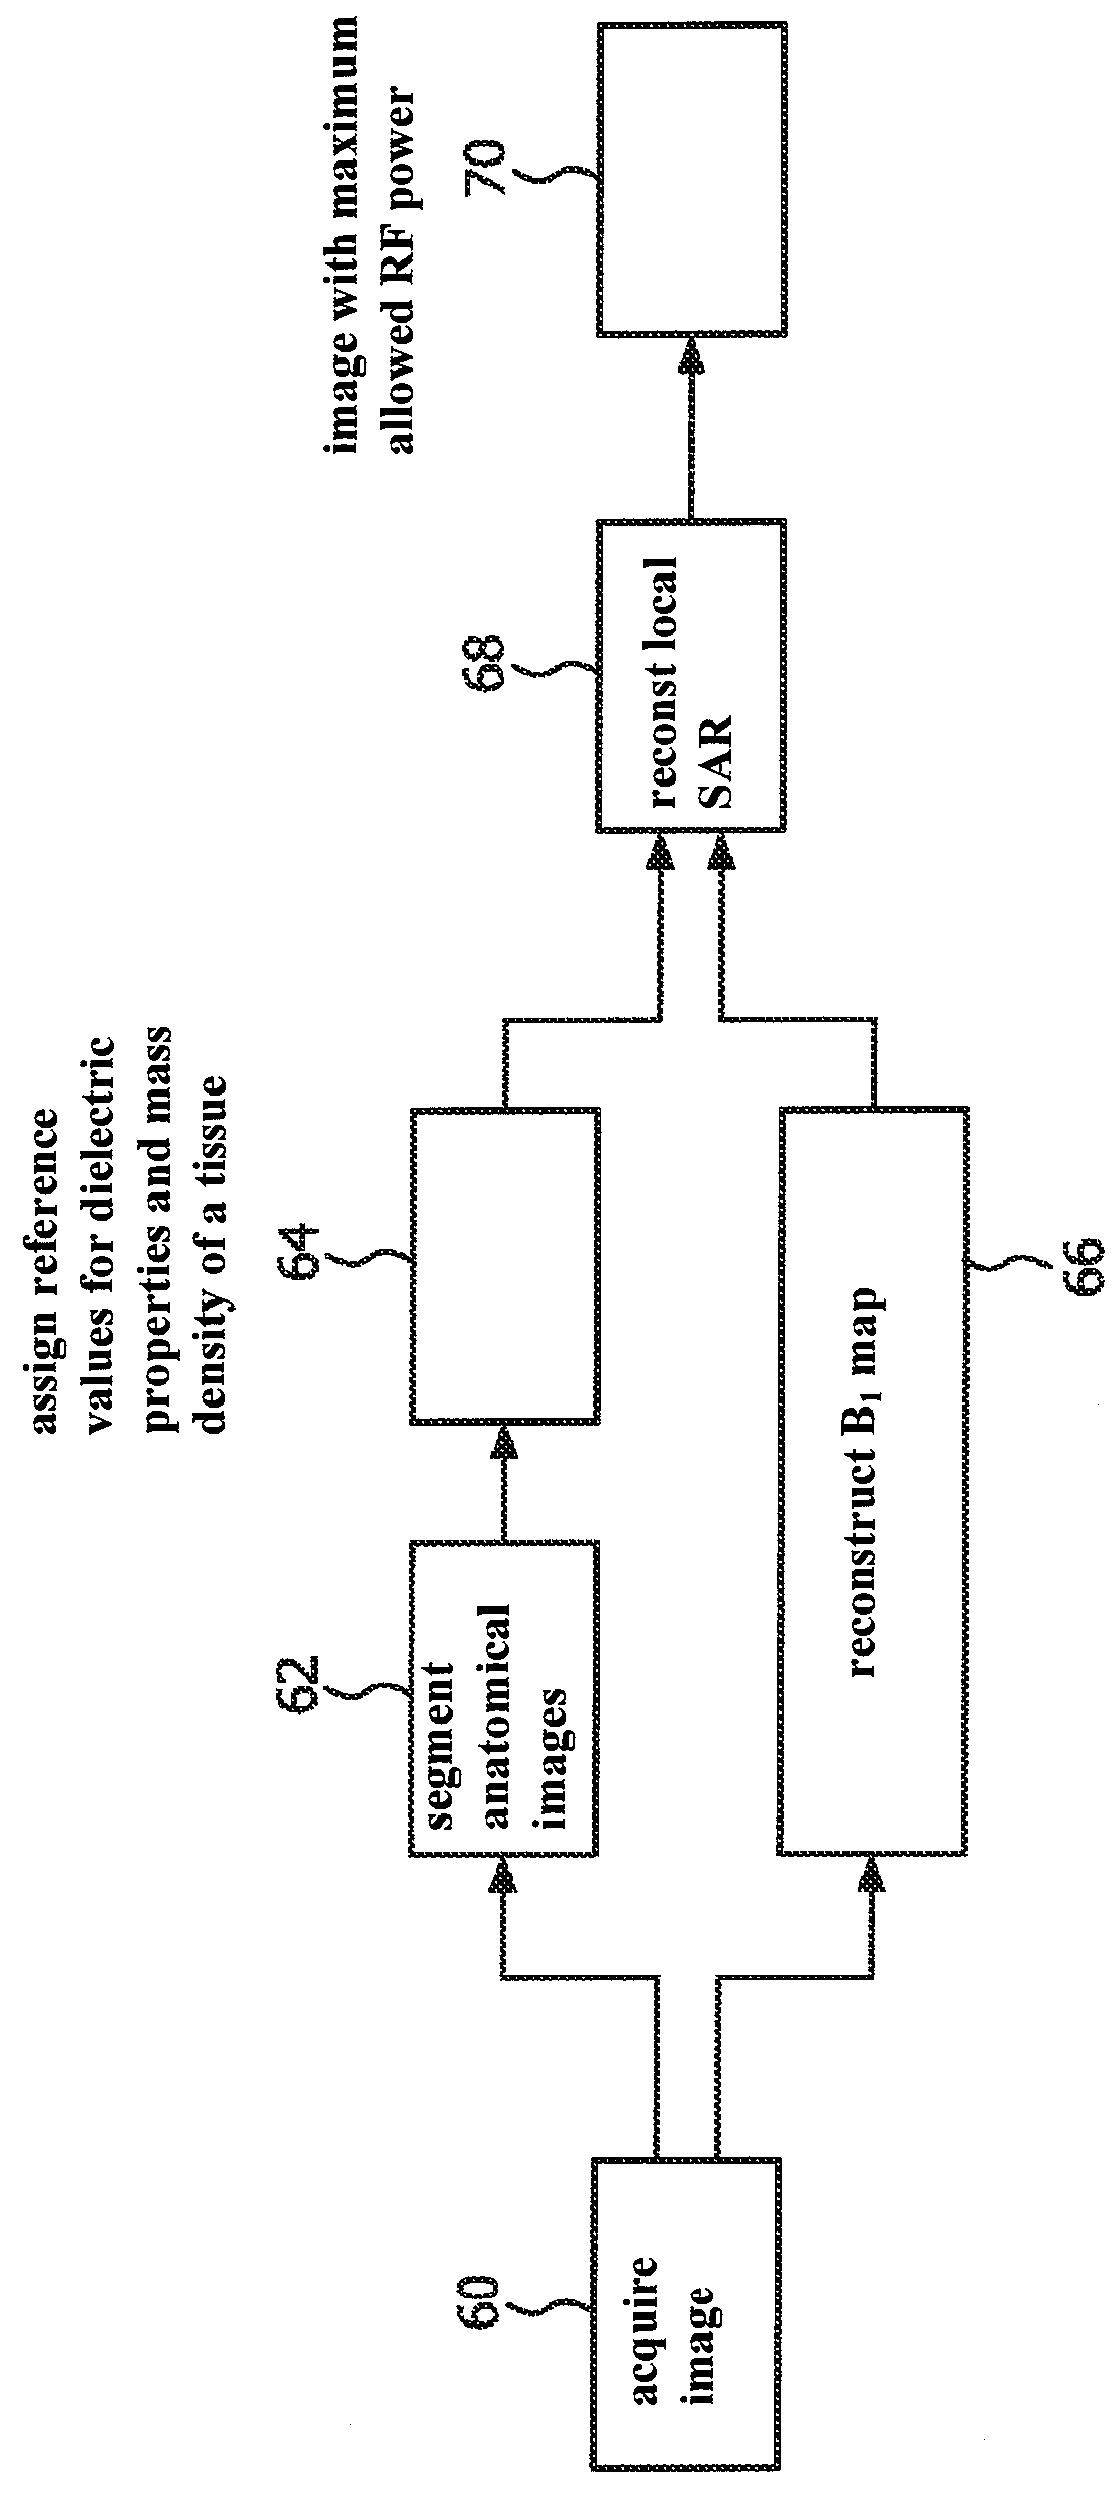 Method for calculating local specific energy absorption rate (SAR) in nuclear magnetic resonance